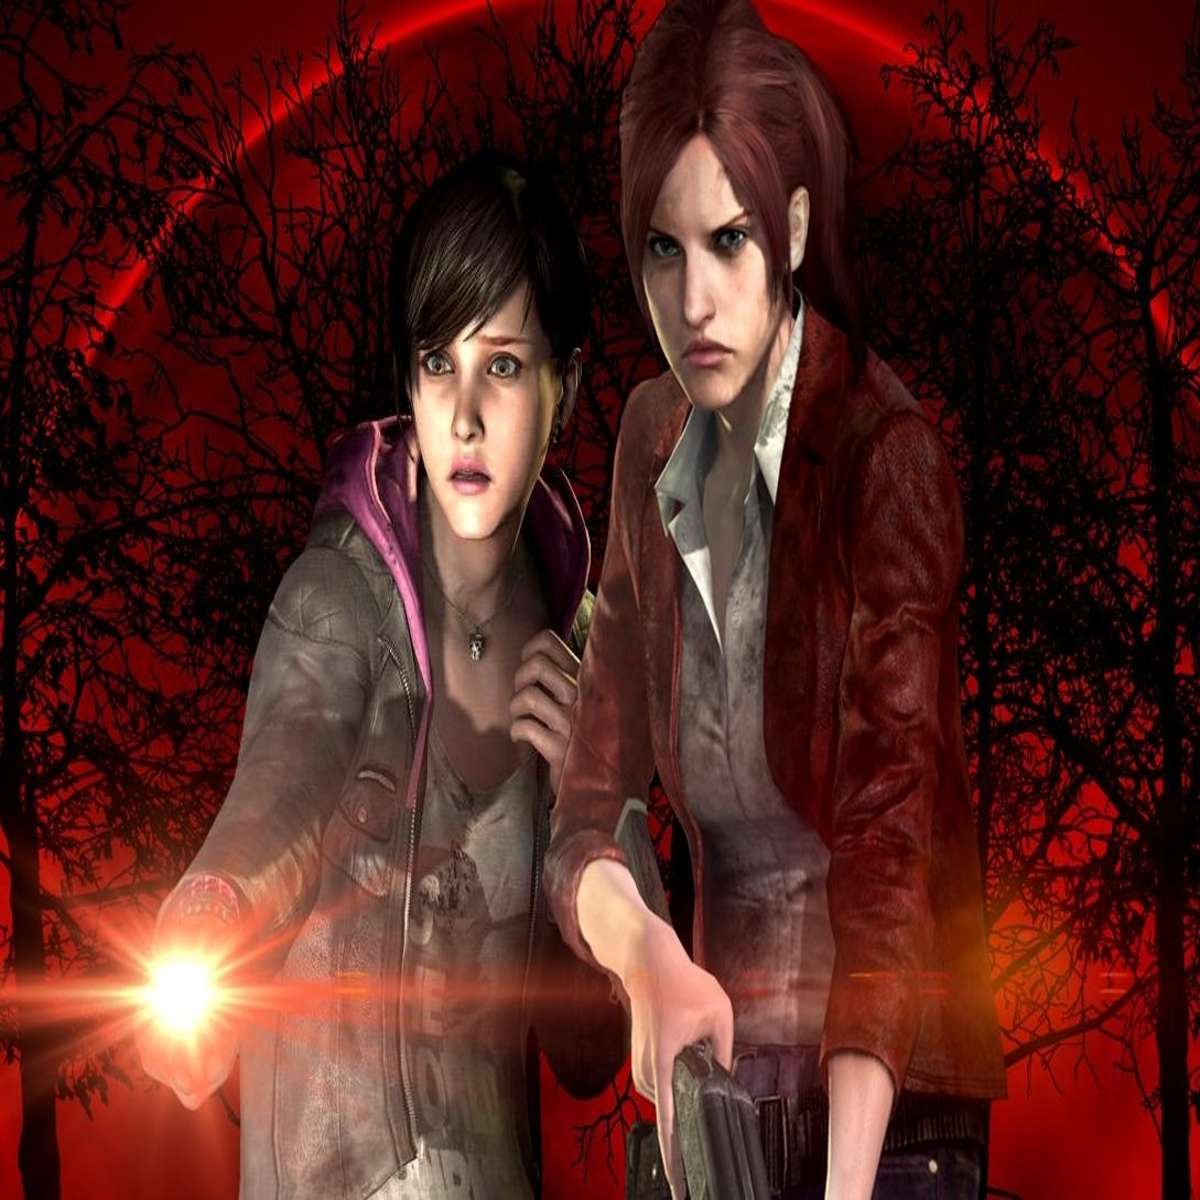 Resident Evil 3 Remake vs Revelations 2. Who do you think is better between  the two? I replayed Revelations 2 after having already finished the remake  of 3 several times. I noticed